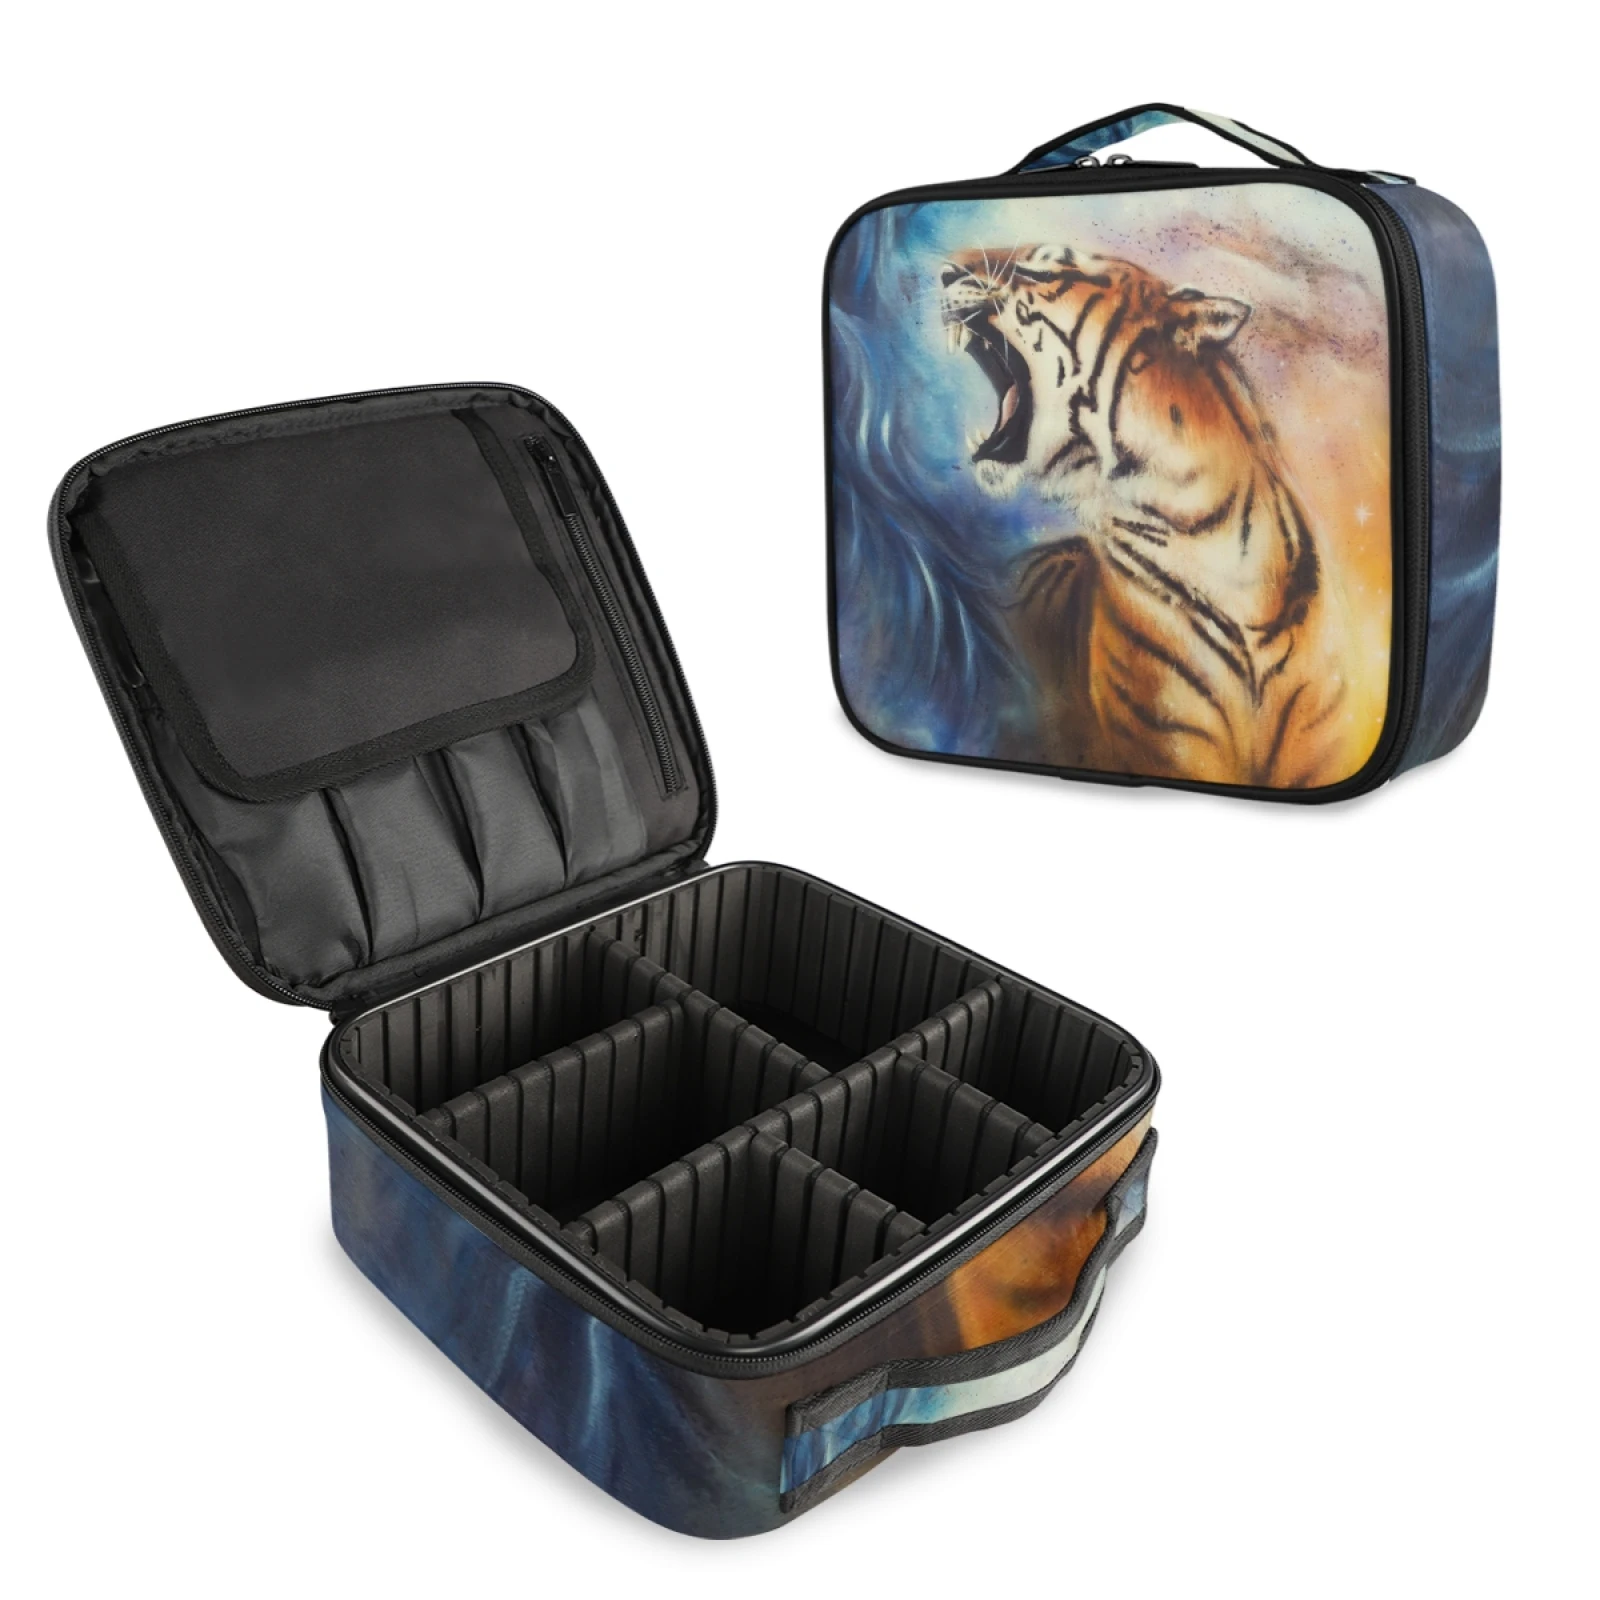 

High Quality Female Professional Makeup Tiger Skin Print Organizer Bolso Mujer Cosmetic Bag Large Capacity Storage Case Suitcase